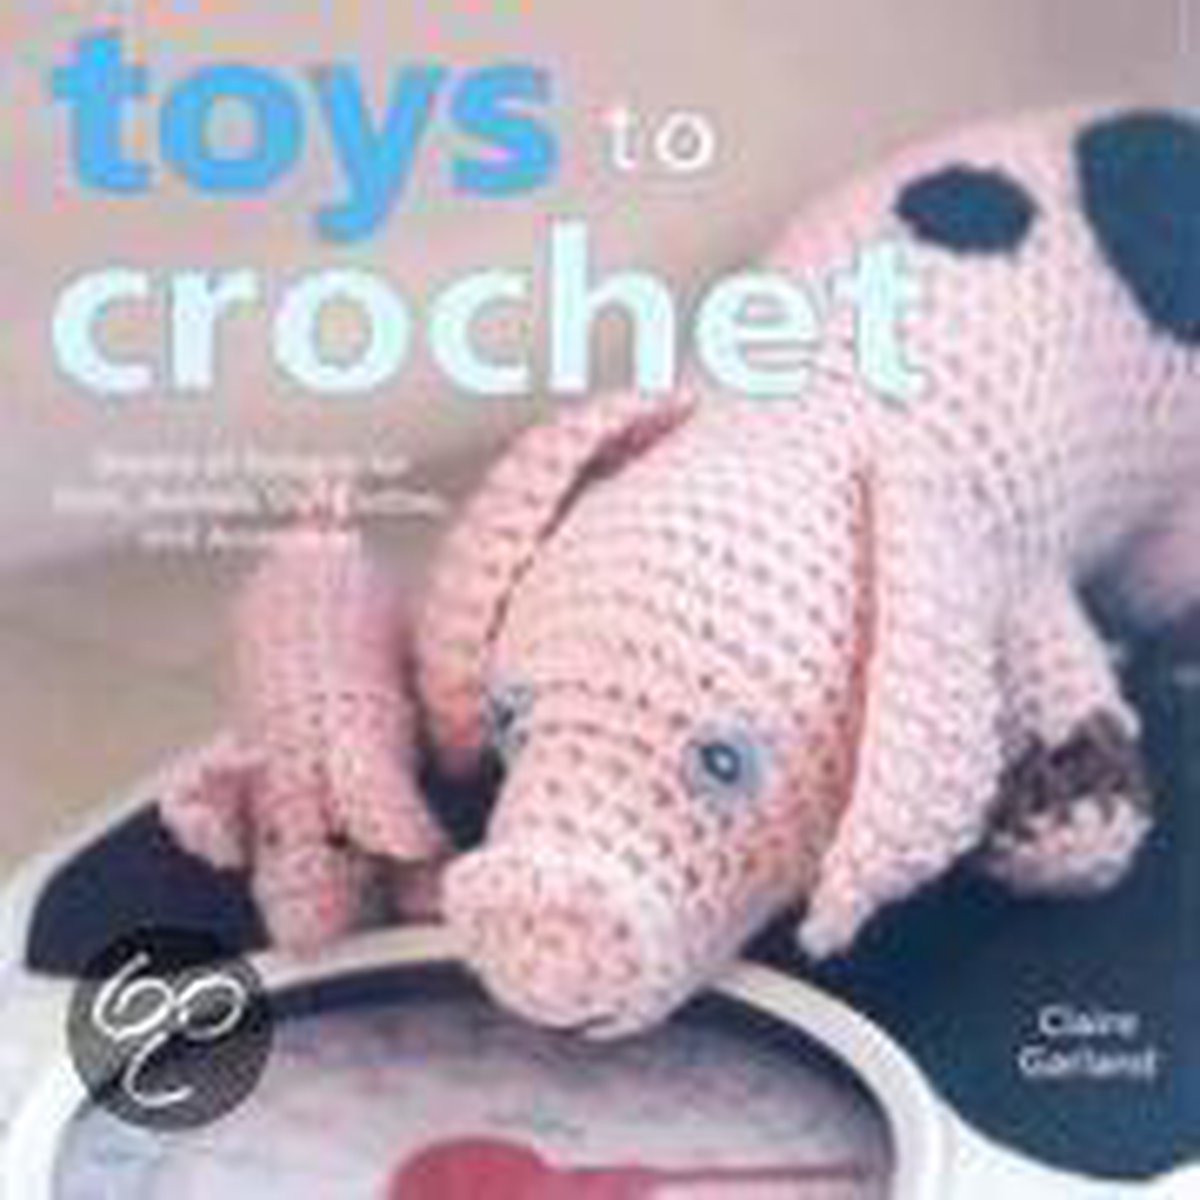 Toys to Crochet